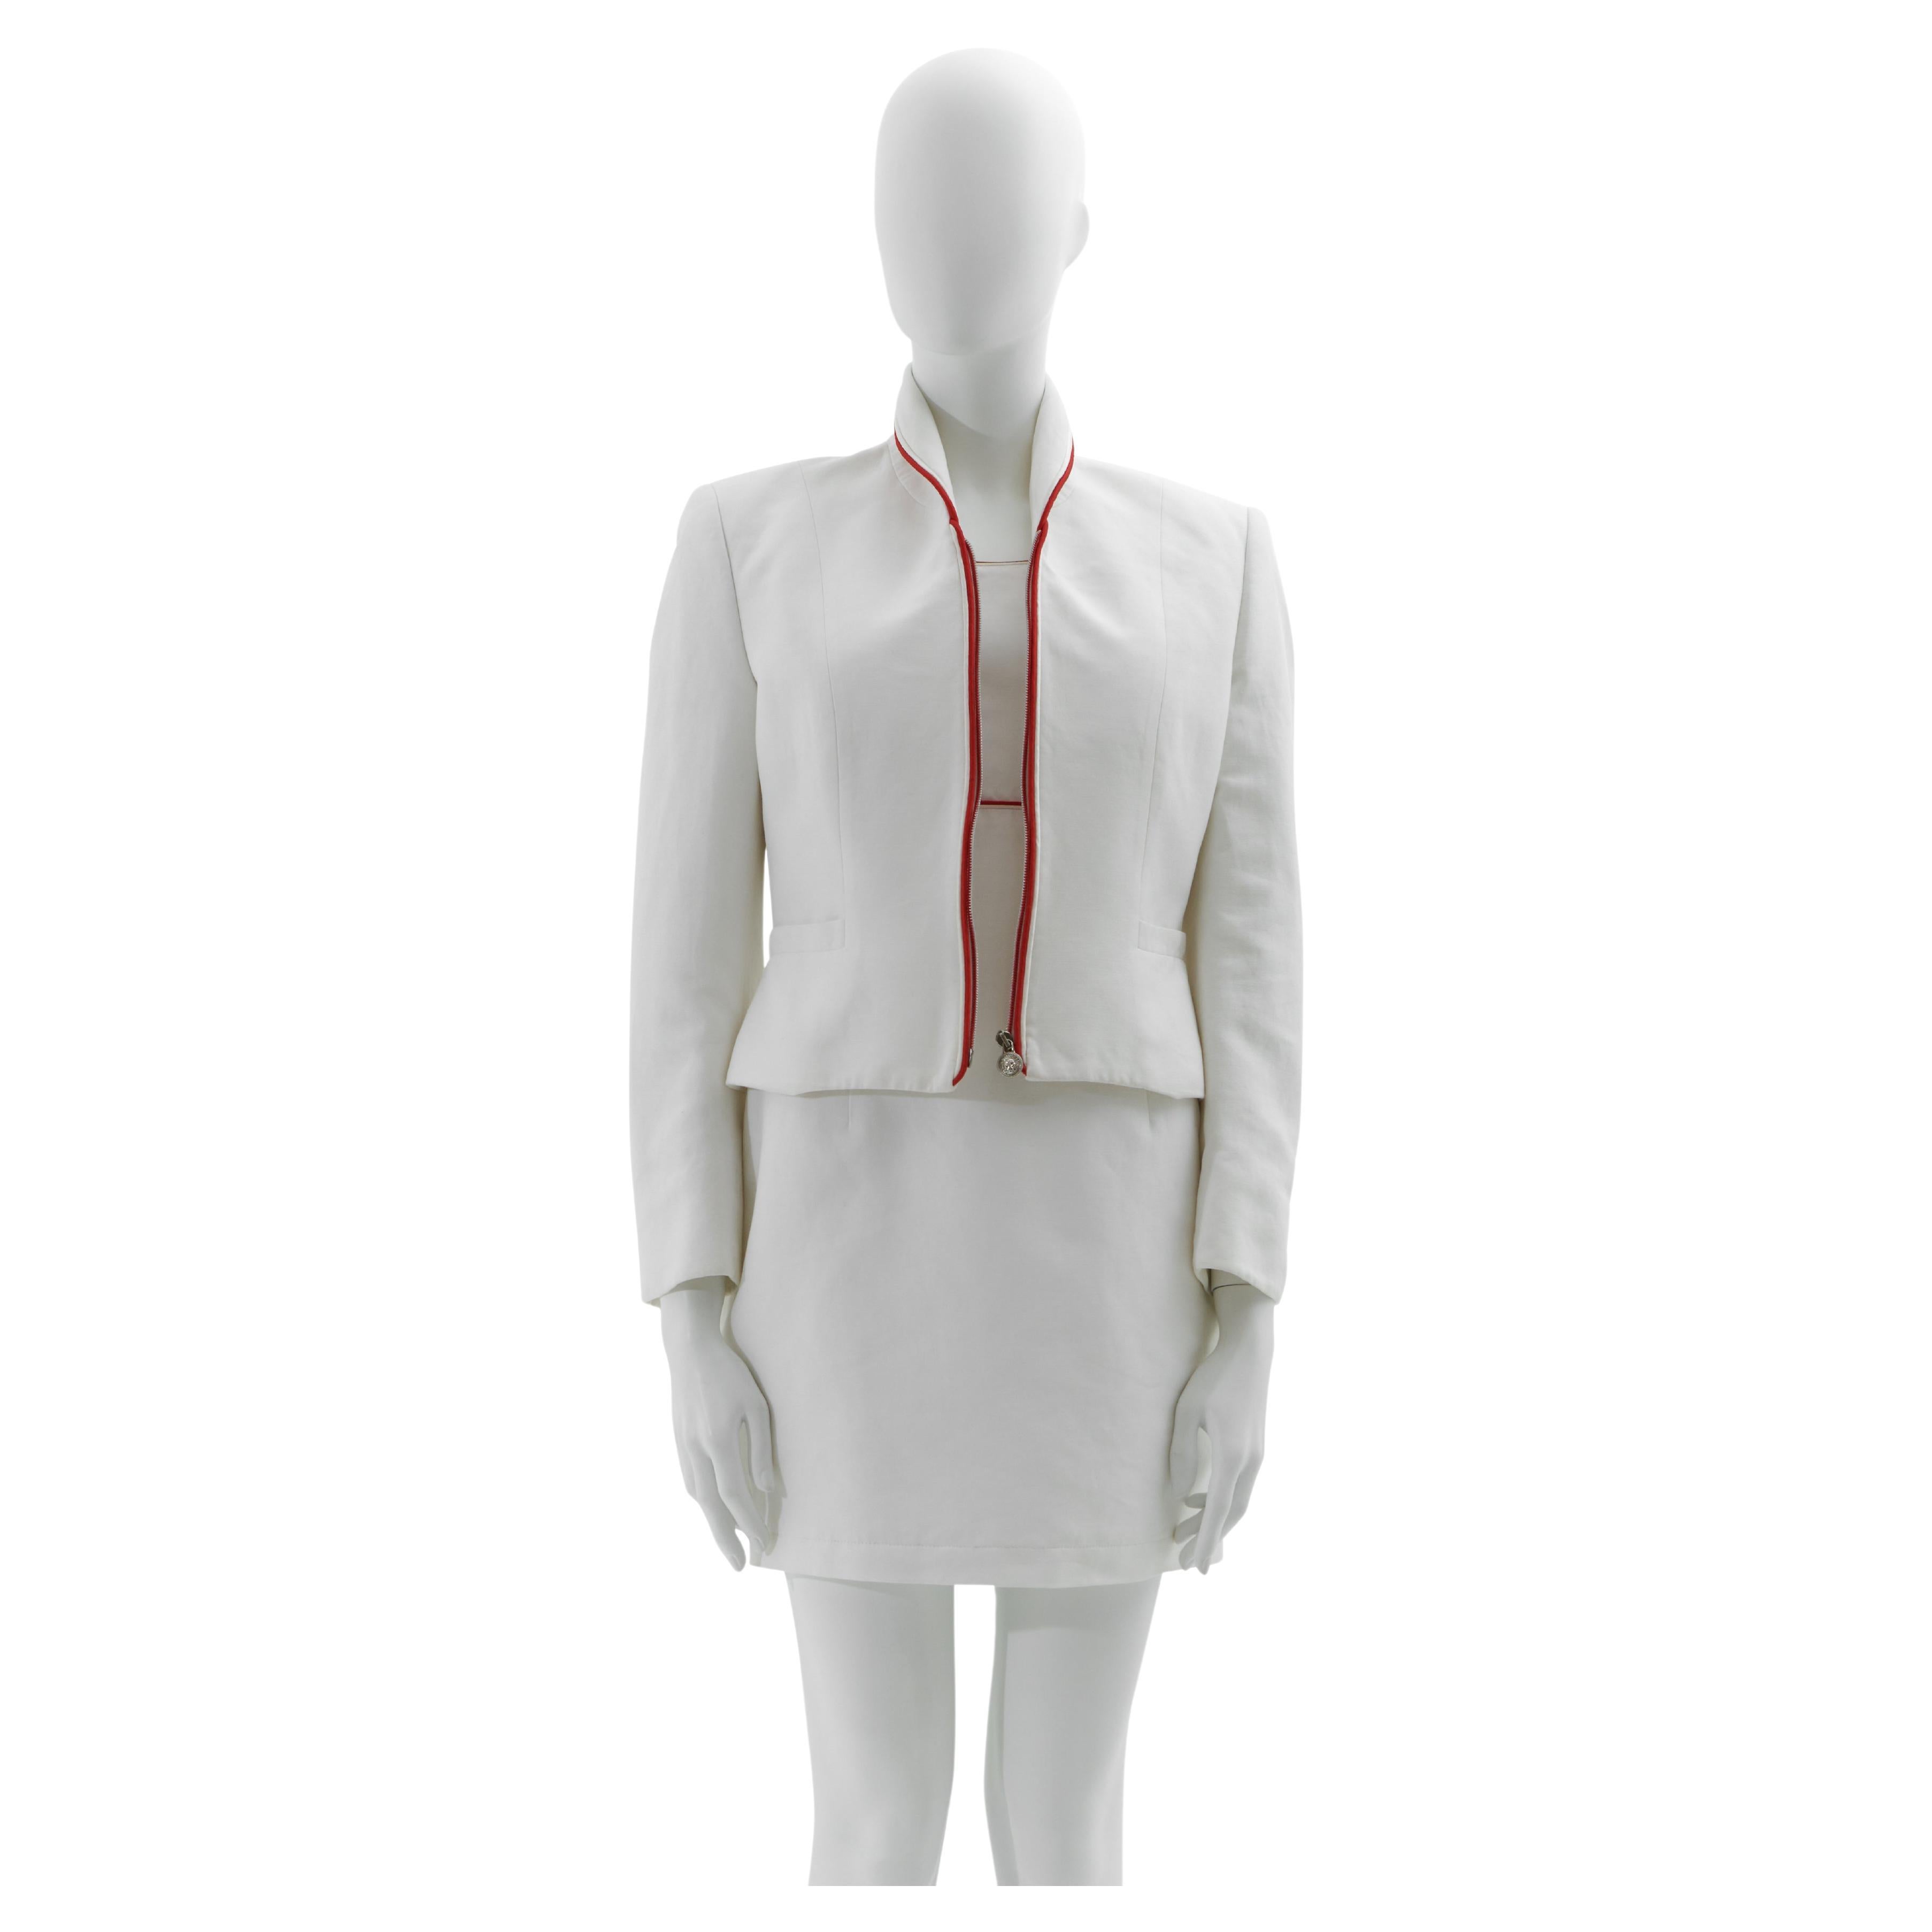 Versus by Gianni Versace Early 1990s White cotton dress and crop jacket set